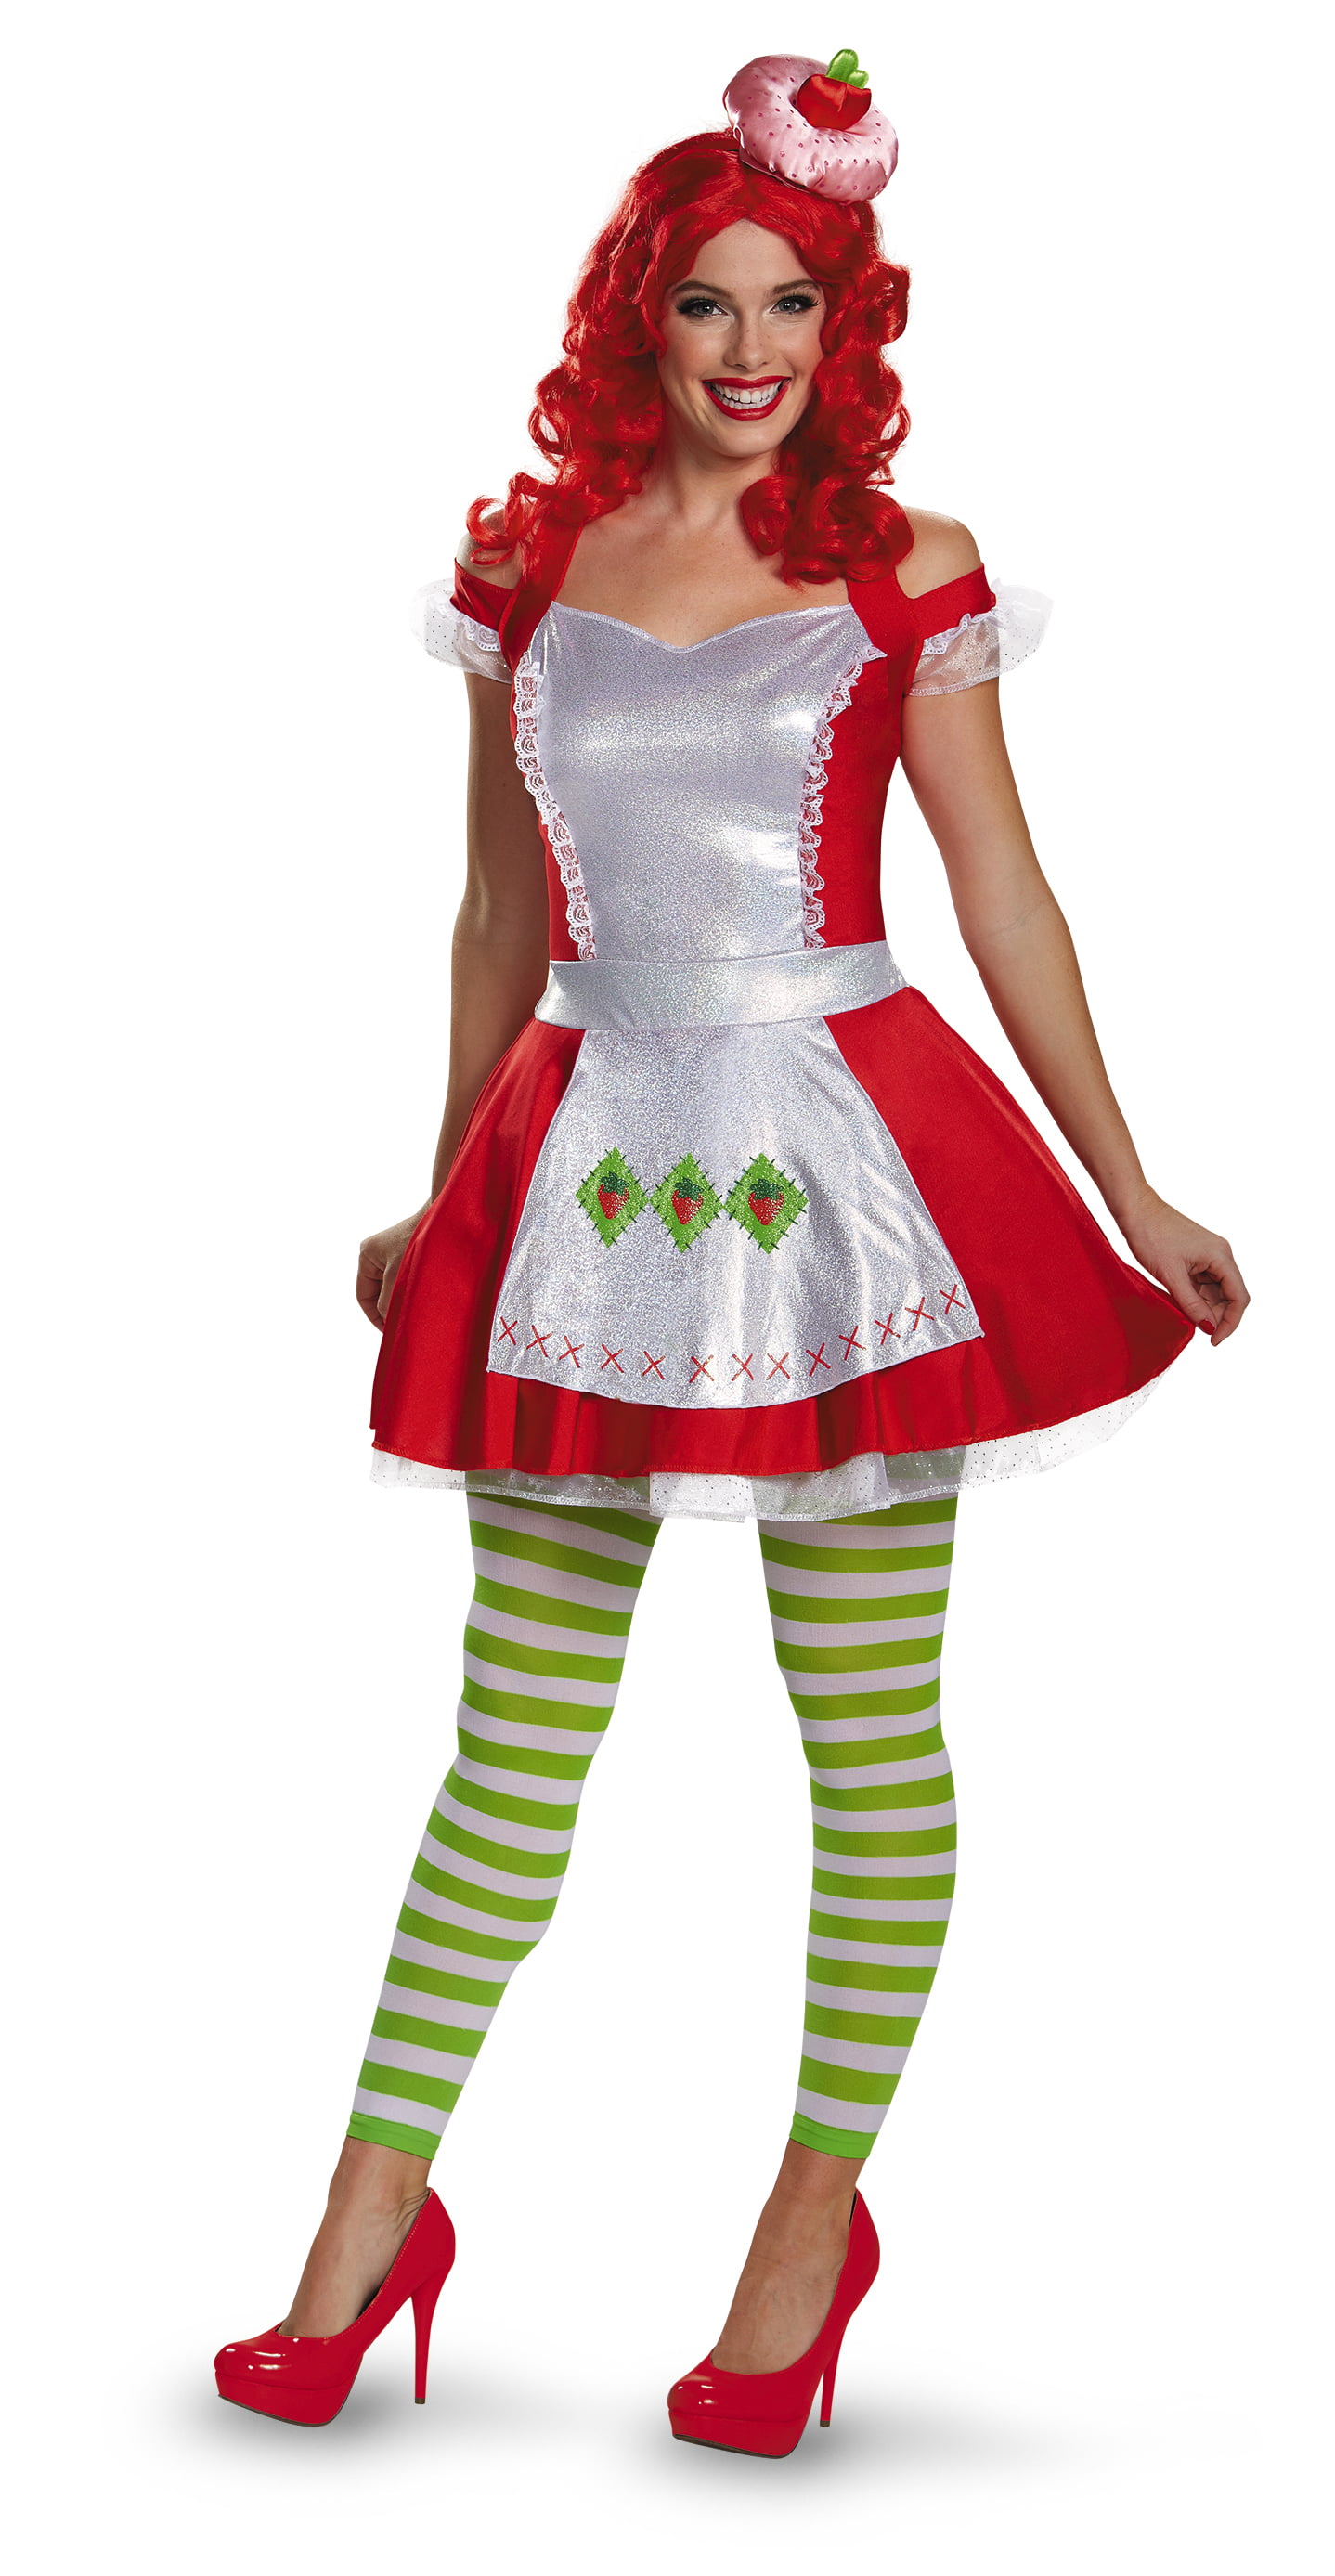 New Disguise Strawberry Shortcake Costume X Small 